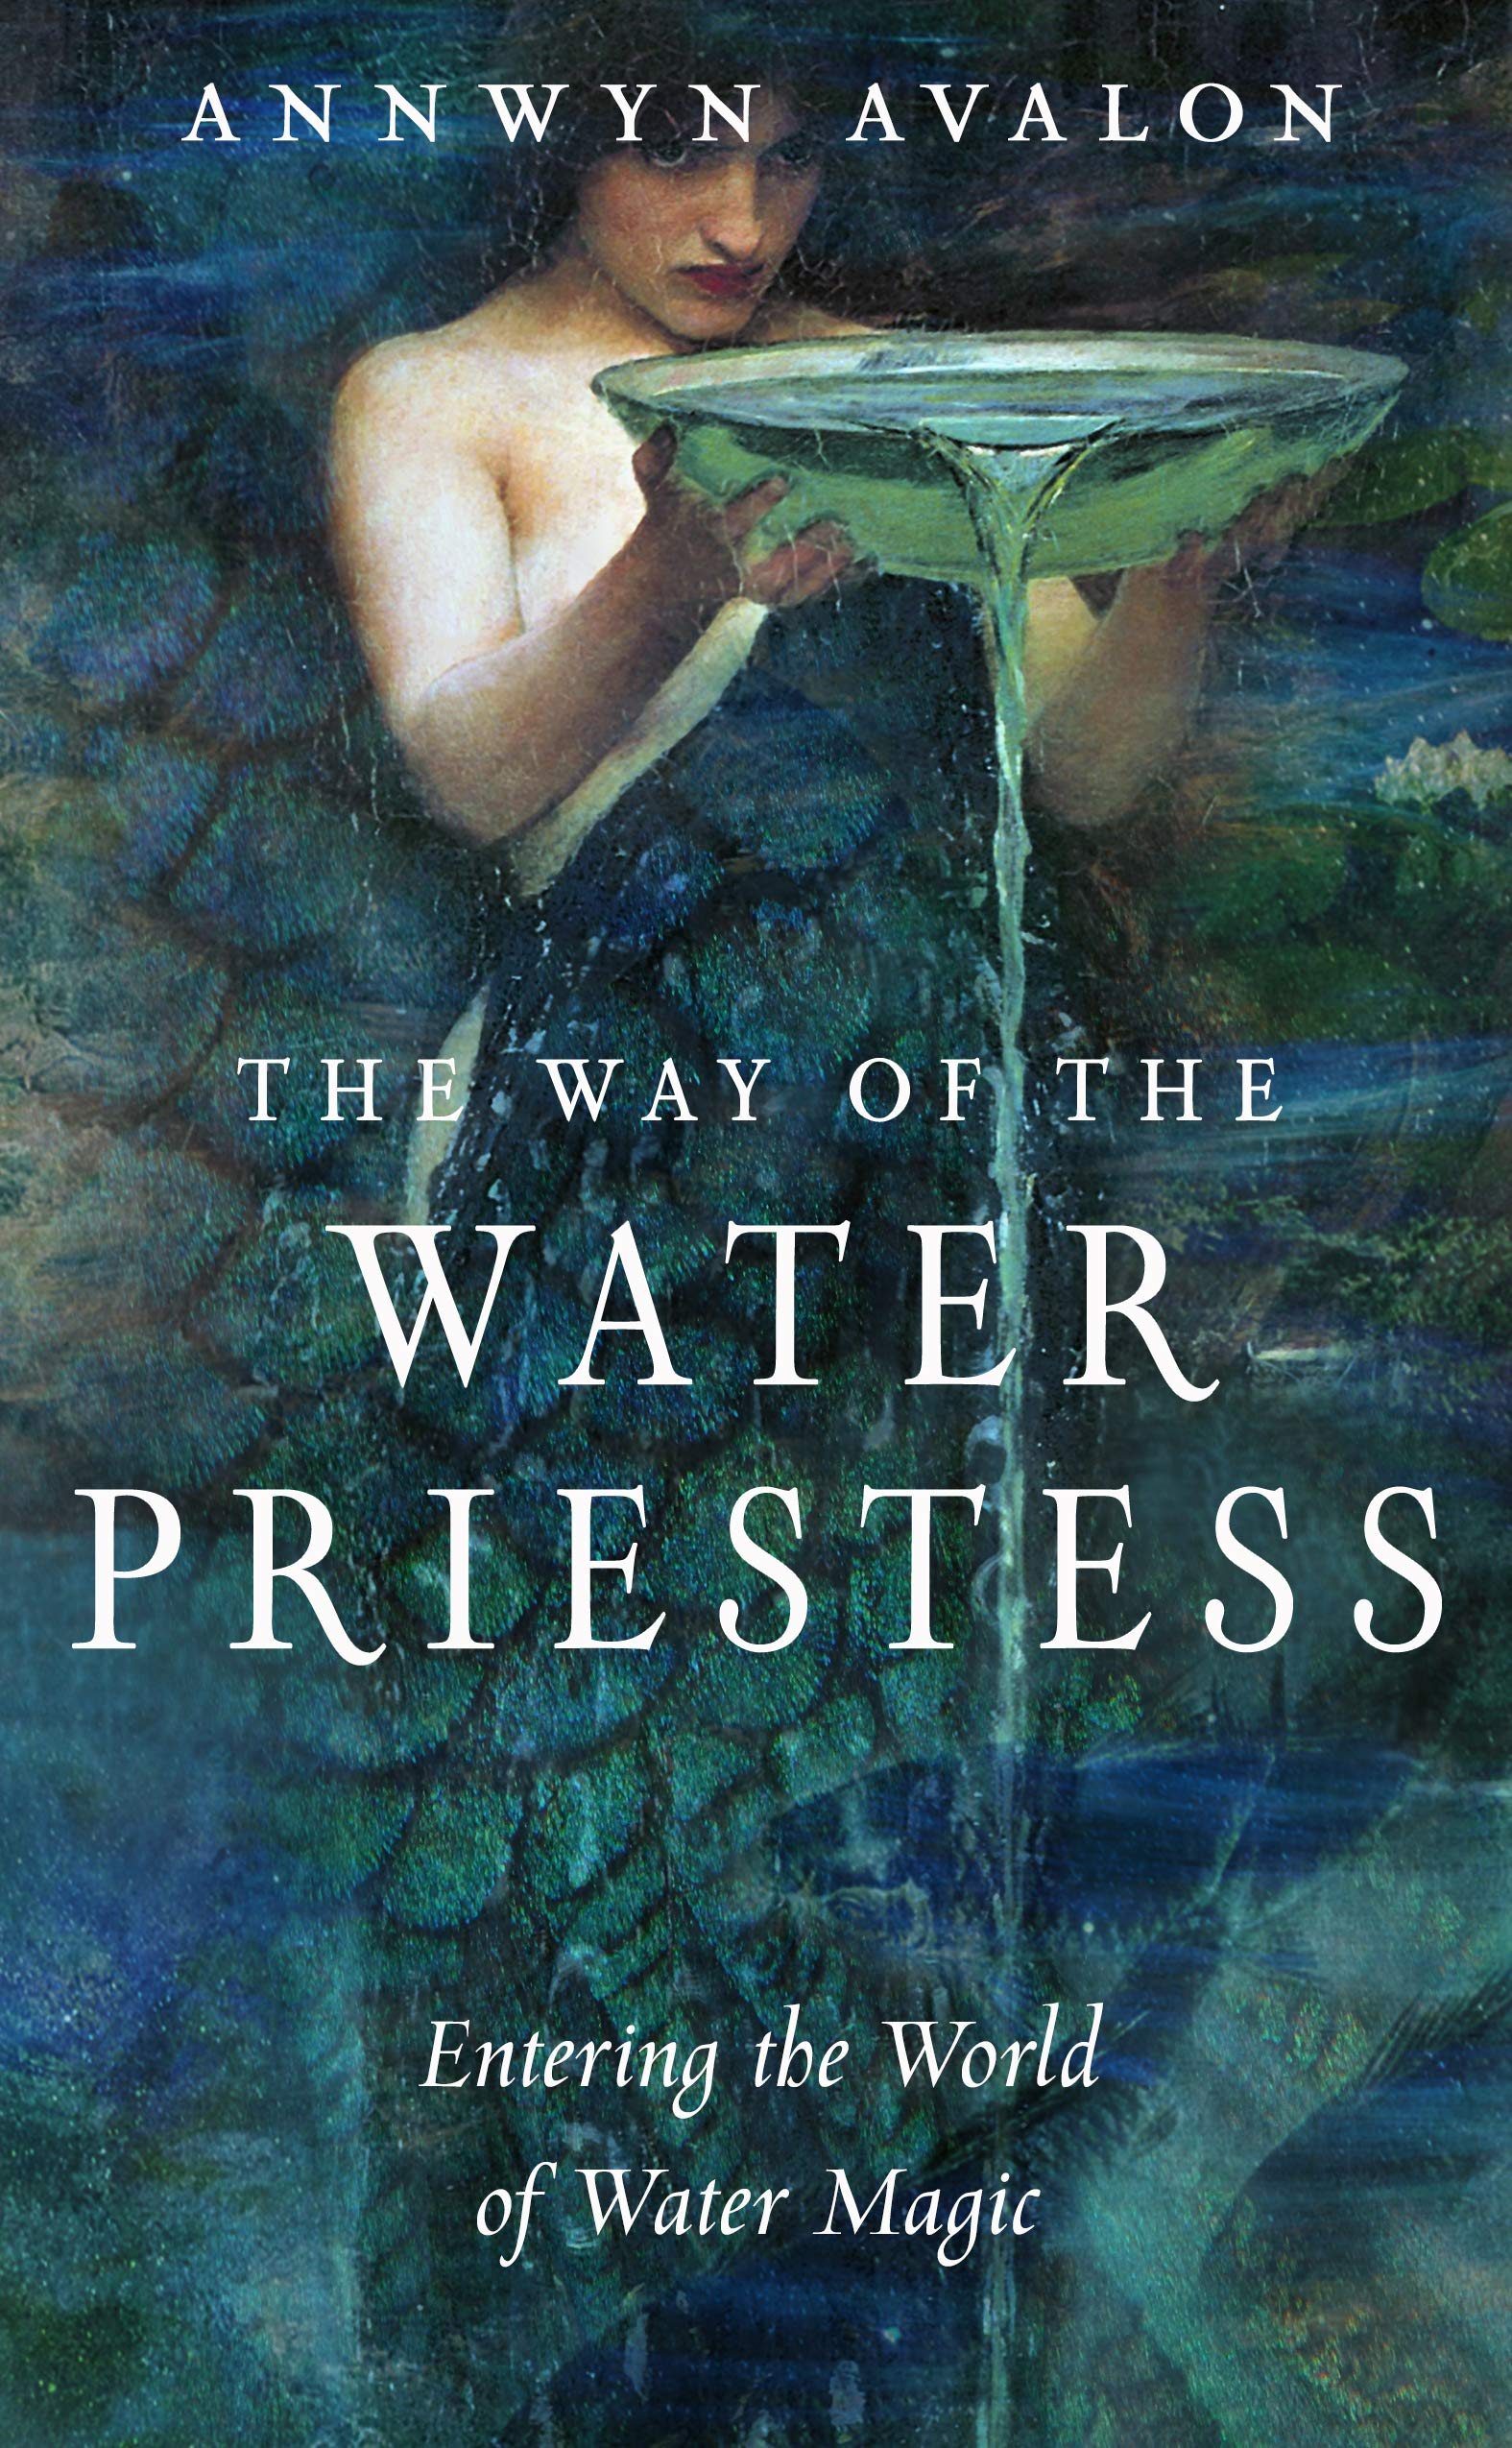 The Way of the Water Priestess by Annwyn Avalon